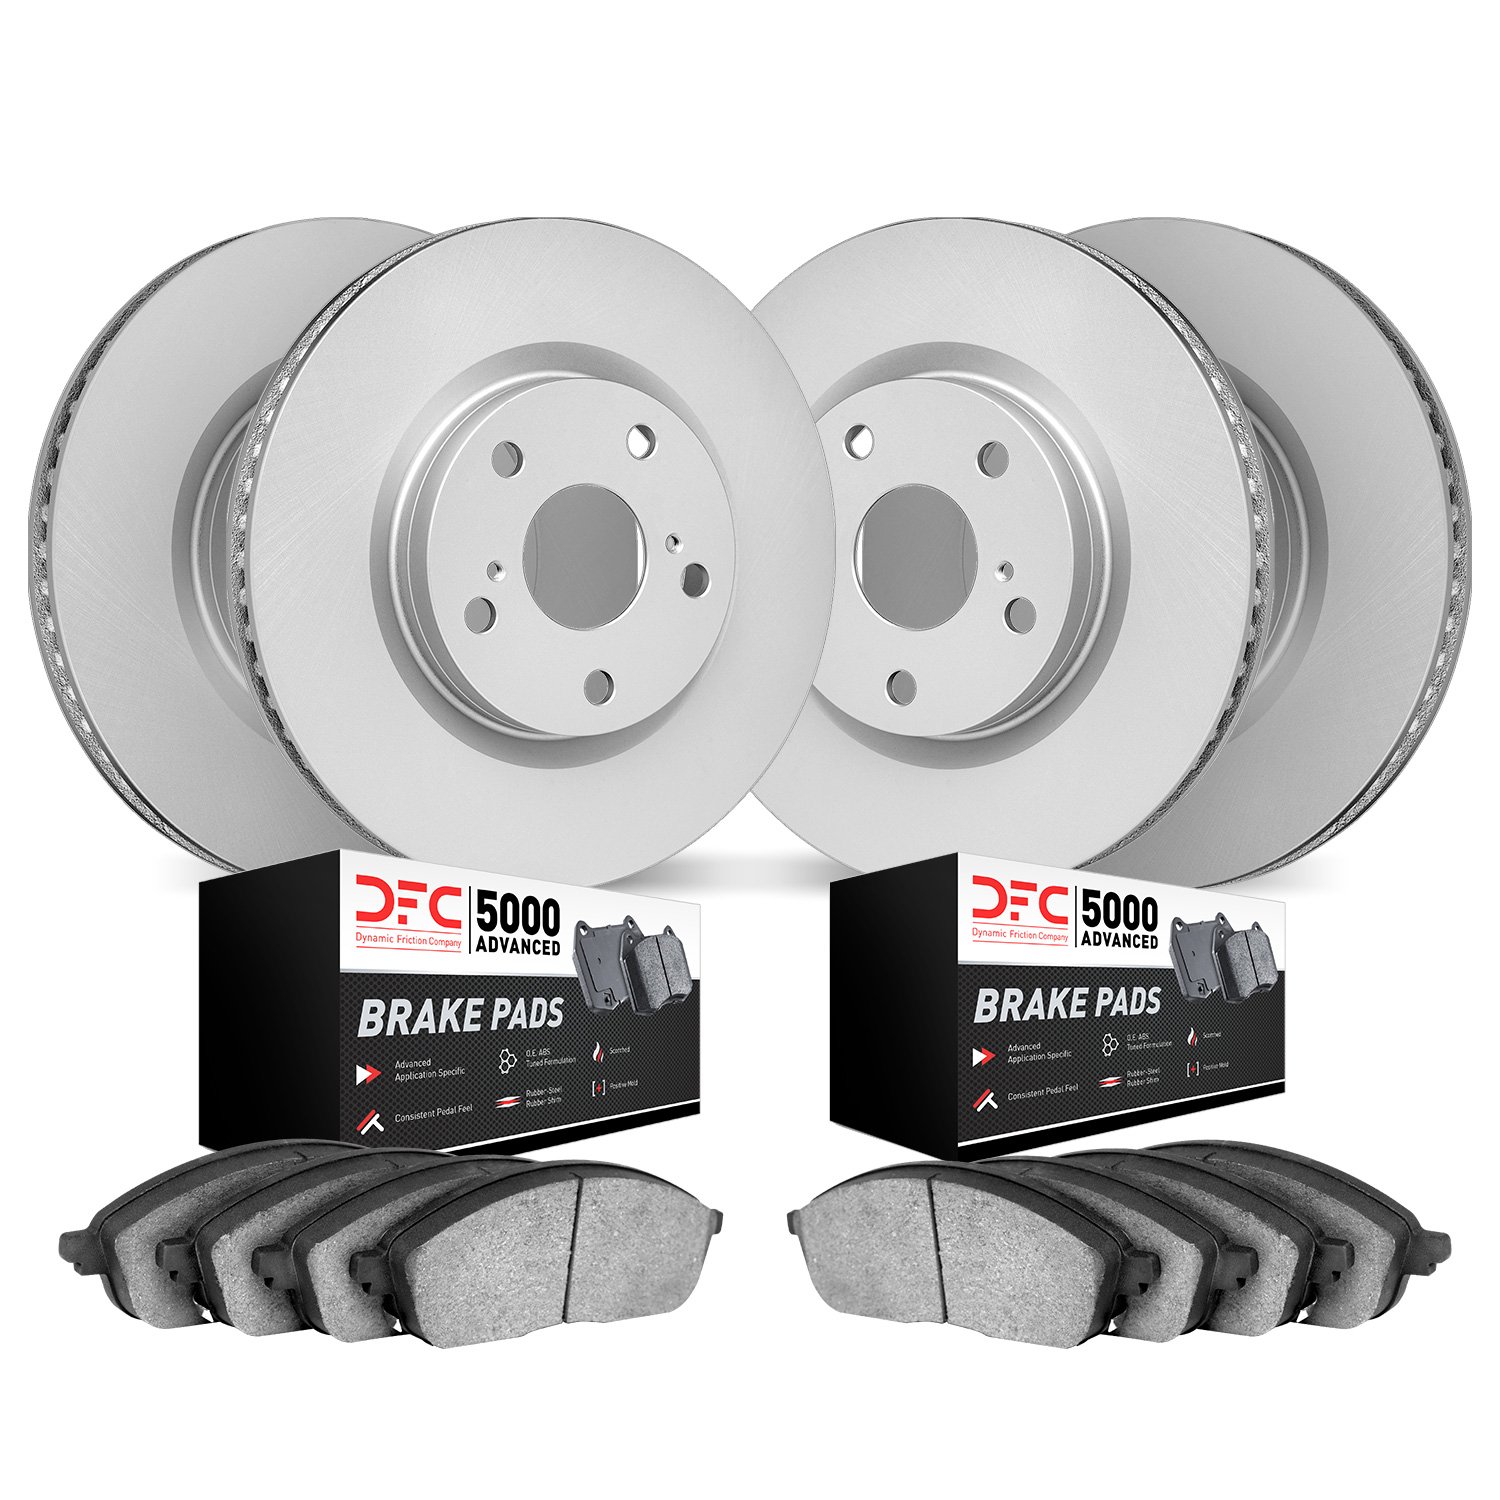 4504-65023 Geospec Brake Rotors w/5000 Advanced Brake Pads Kit, Fits Select GM, Position: Front and Rear